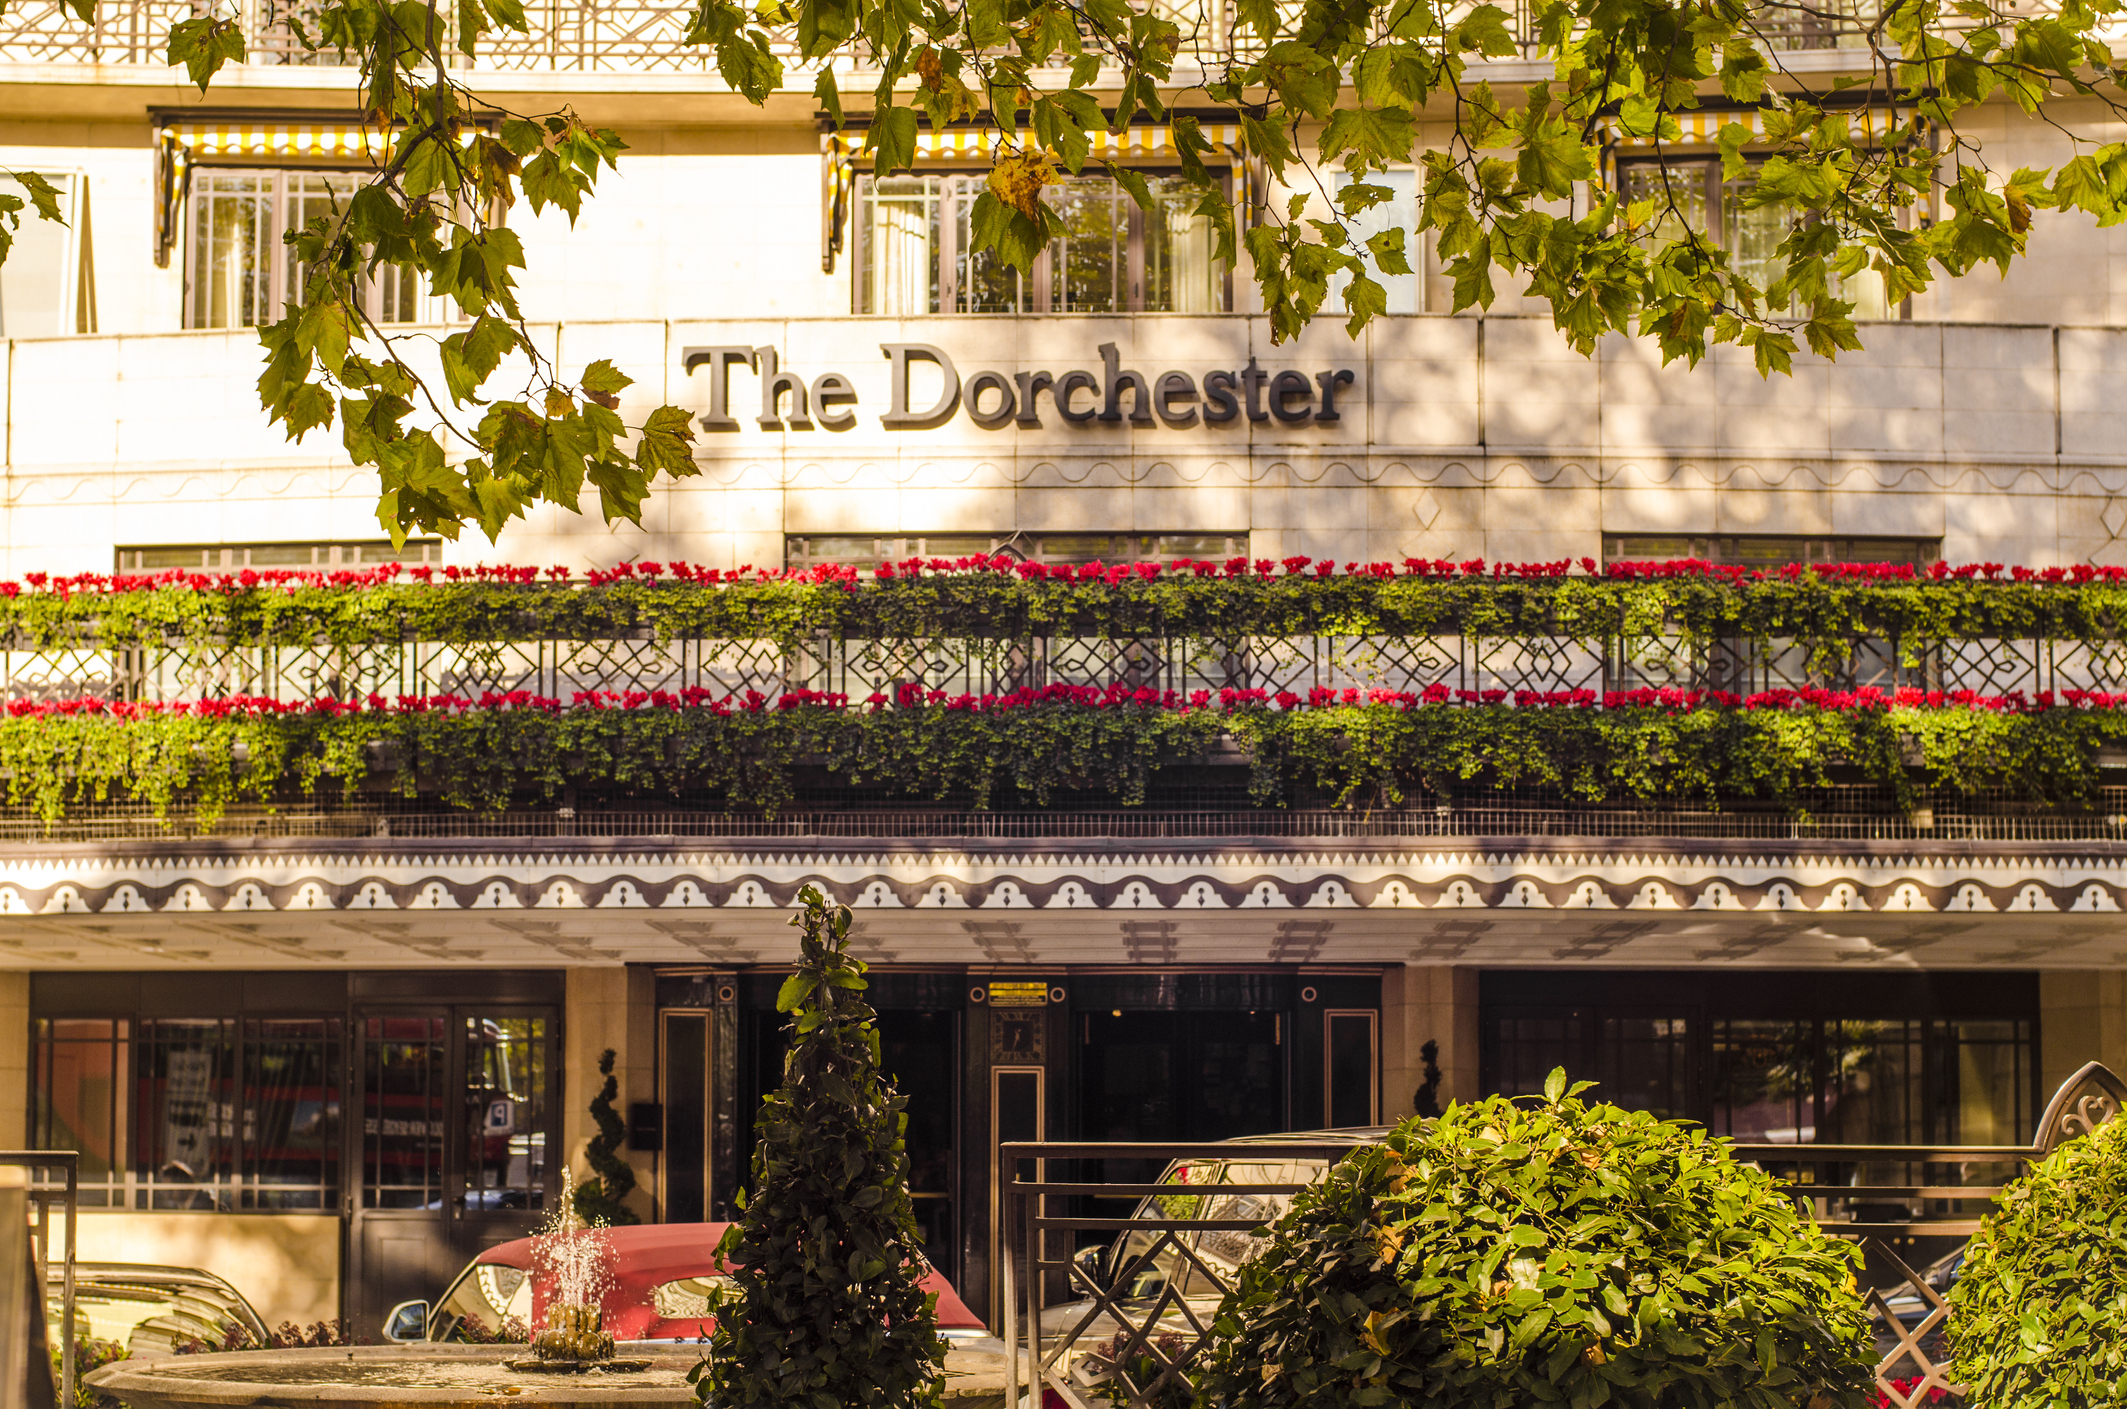 The Dorchester set to auction off 2,000 items ahead of major renovation